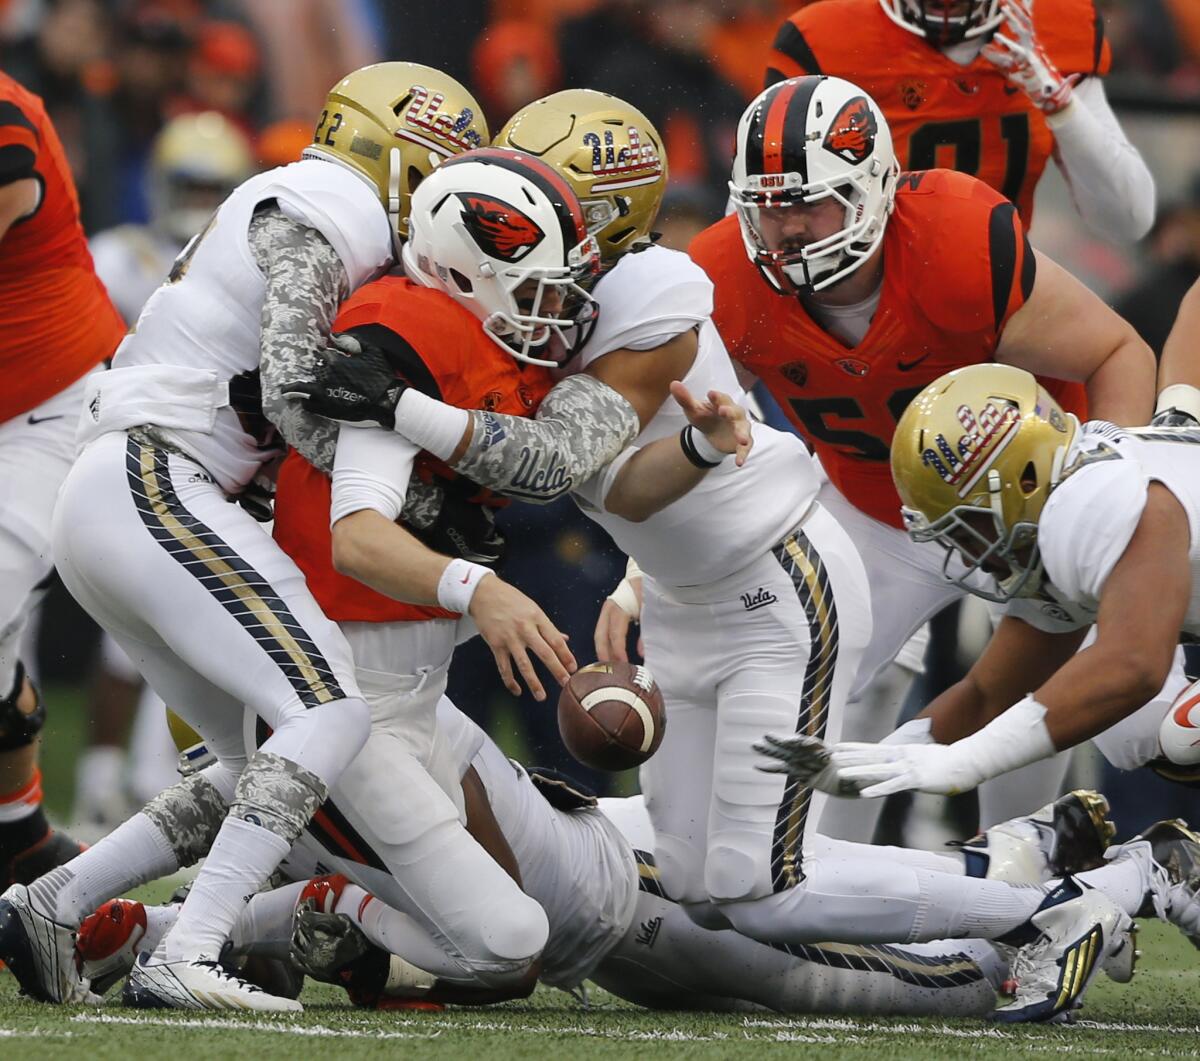 Oregon State quarterback Nick Mitchell fumbles the ball while being tackled by a pair of UCLA defenders during the first half of a game on Nov. 7.